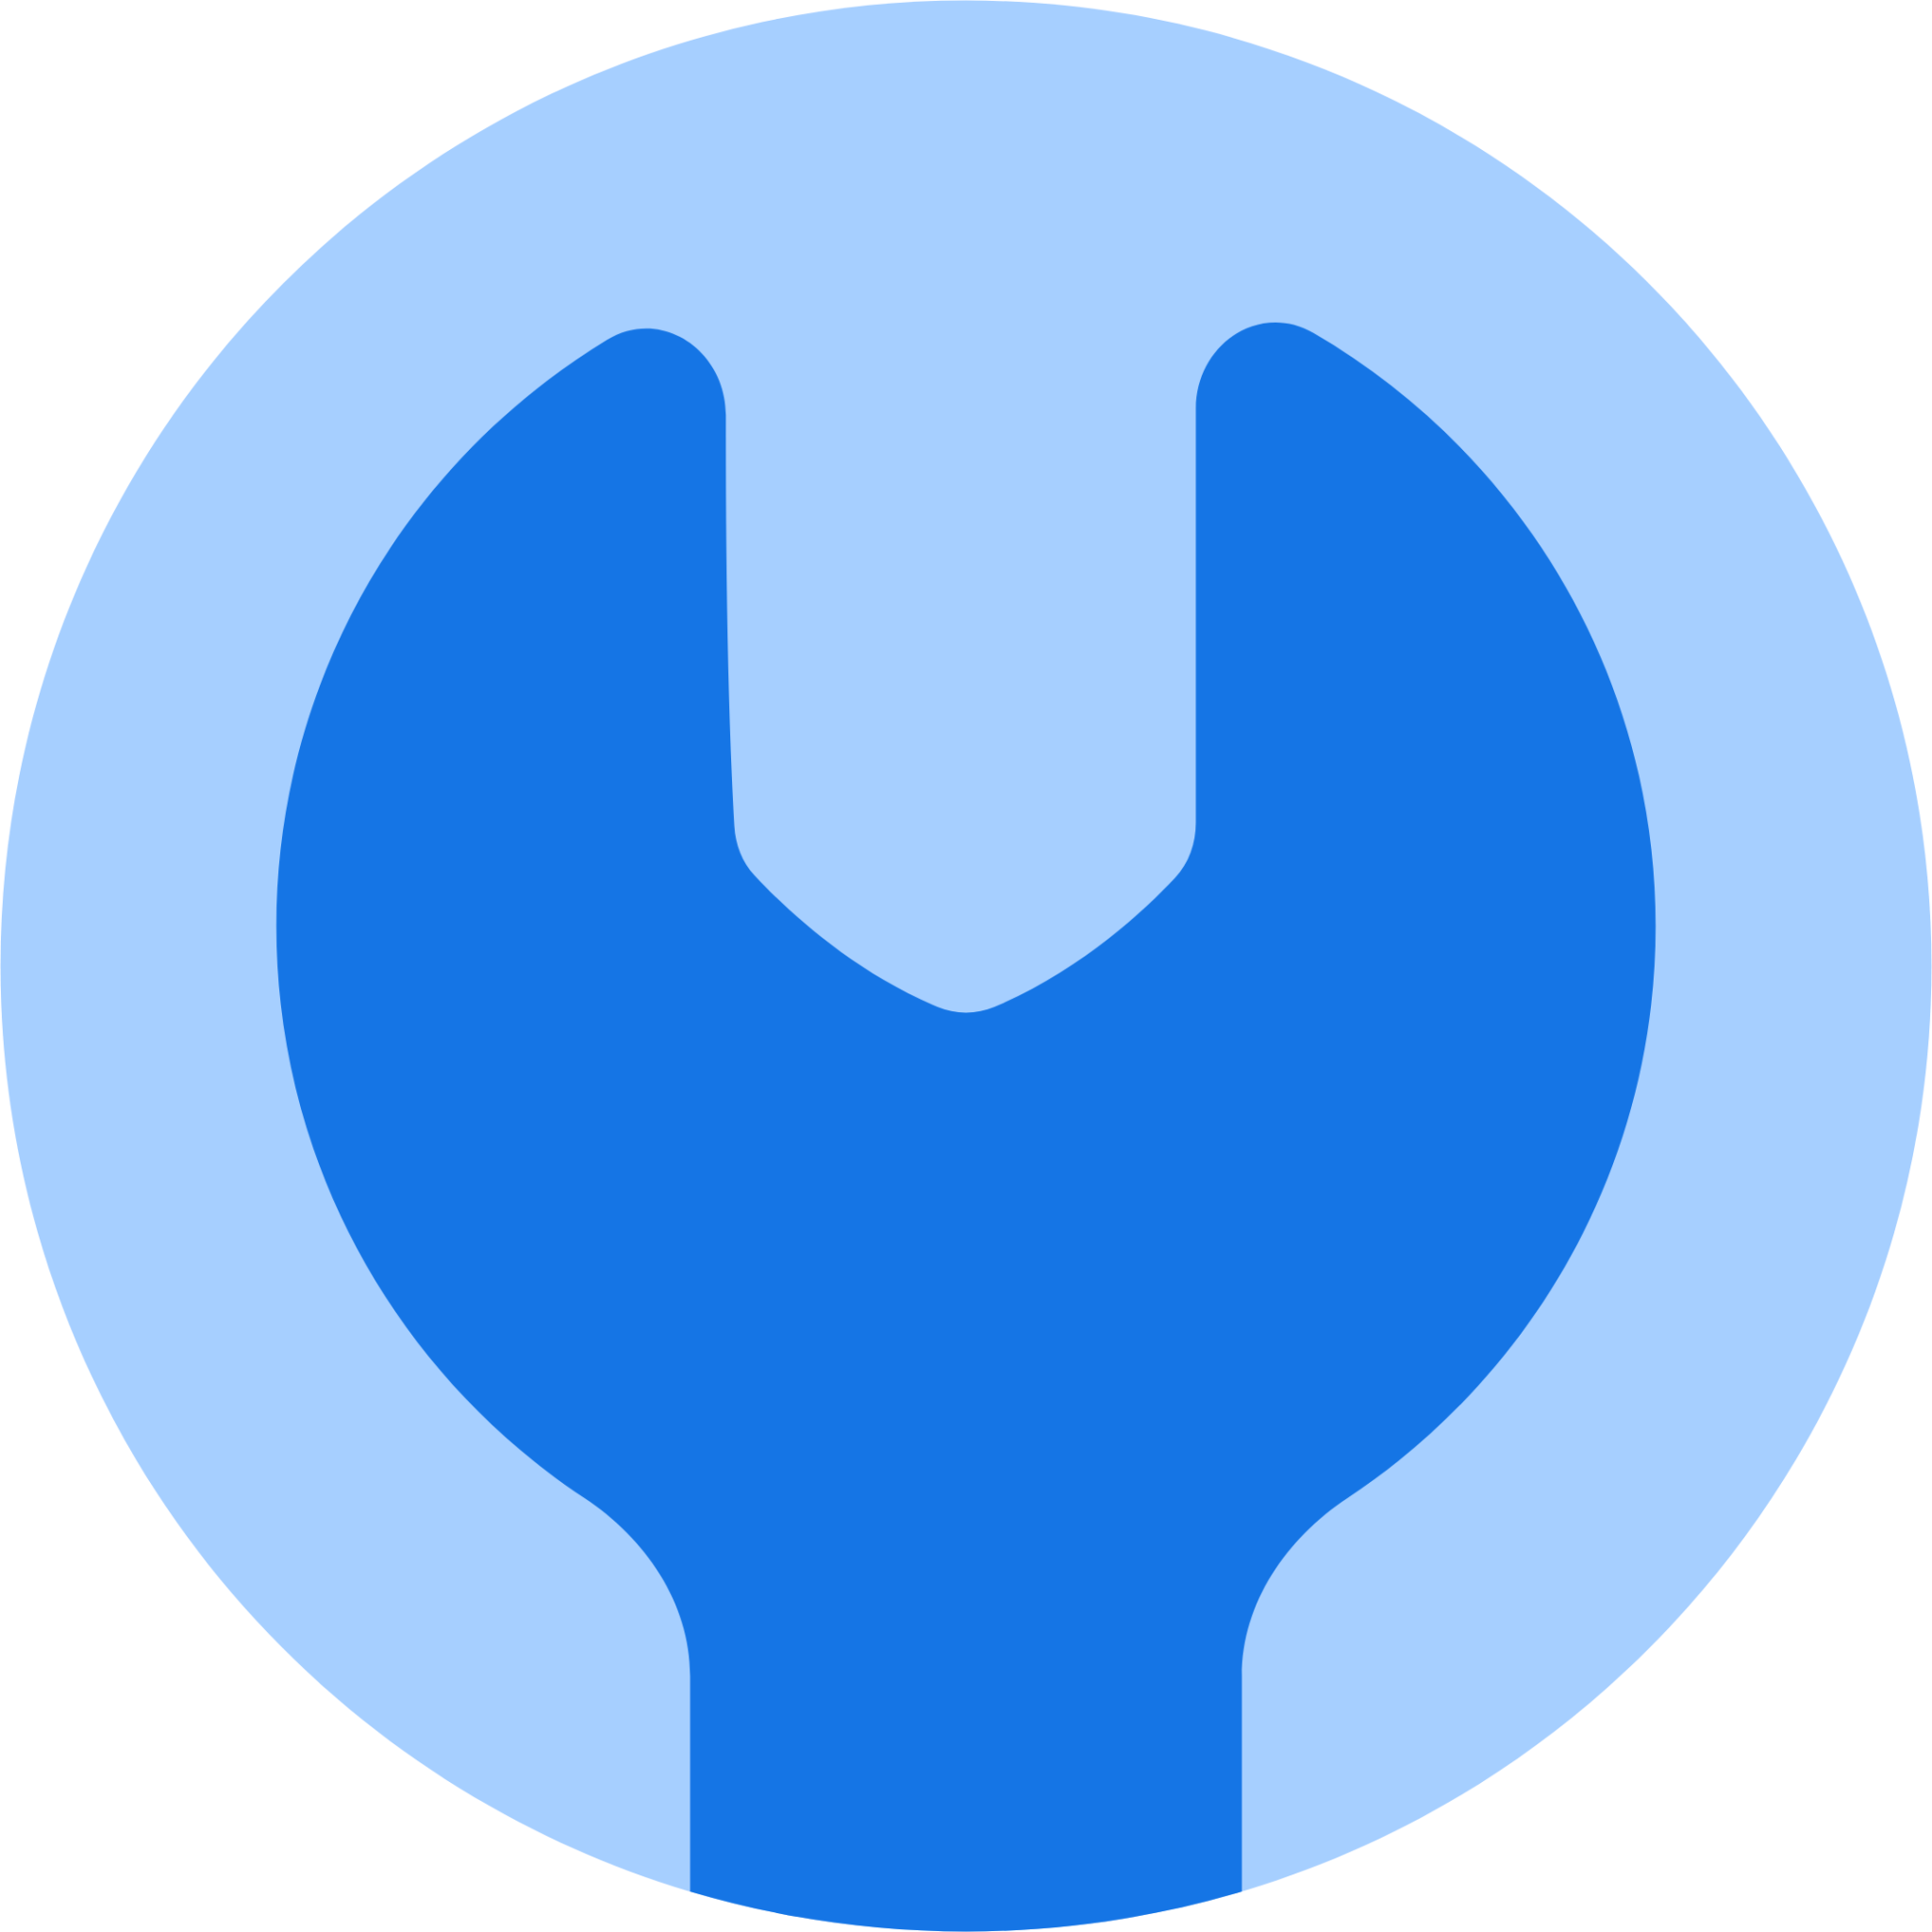 setting wrench icon